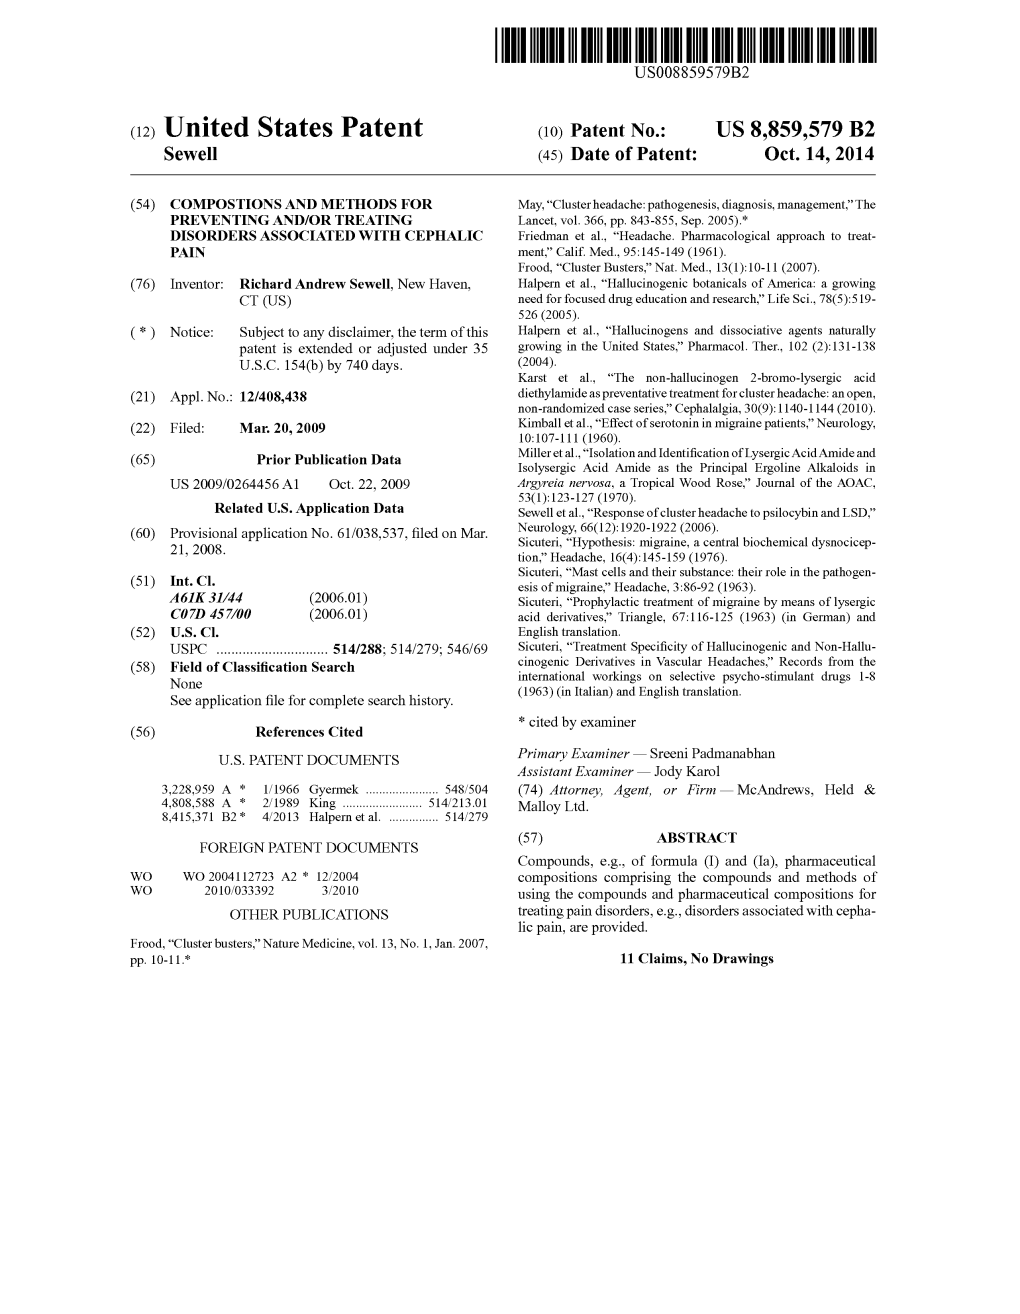 (12) United States Patent (10) Patent No.: US 8,859,579 B2 Sewell (45) Date of Patent: Oct